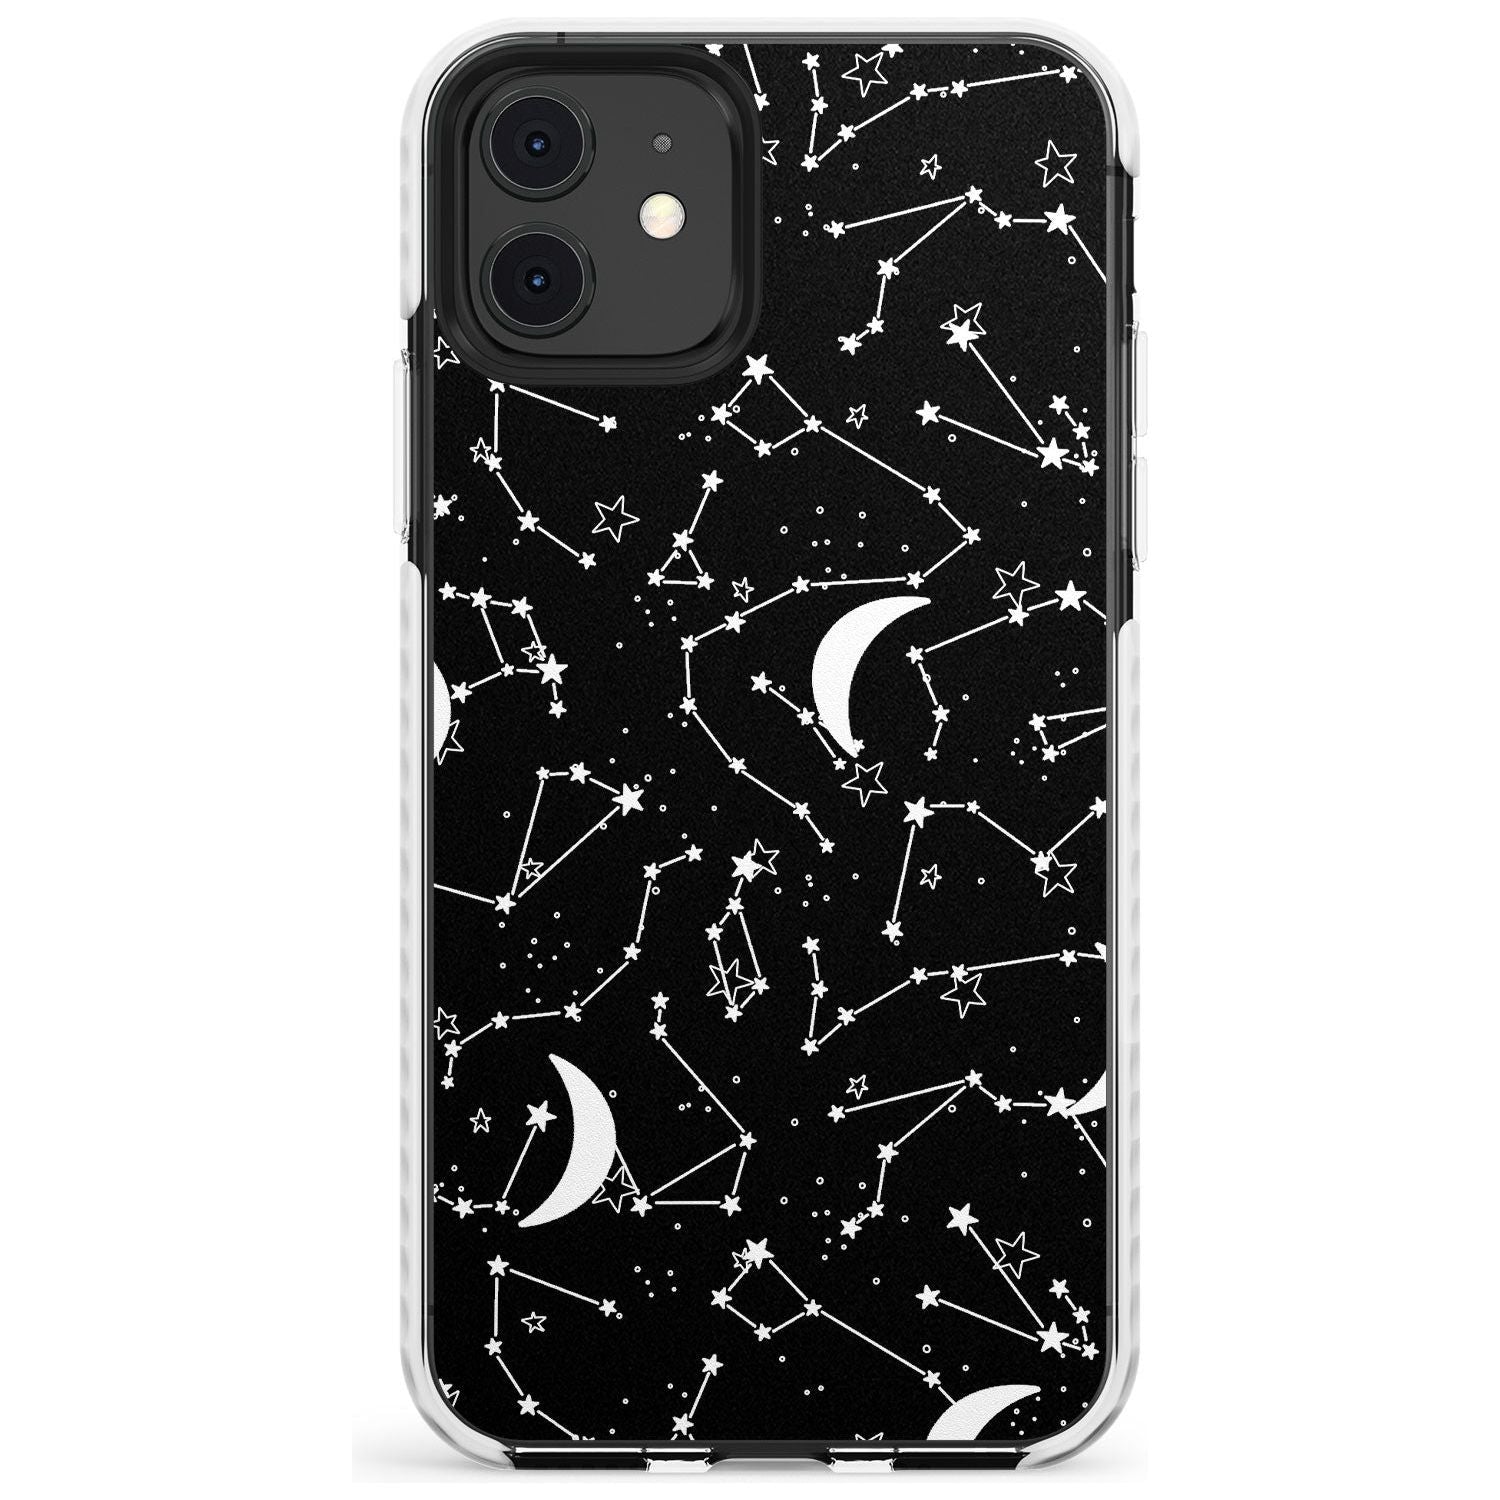 White Constellations on Black Slim TPU Phone Case for iPhone 11